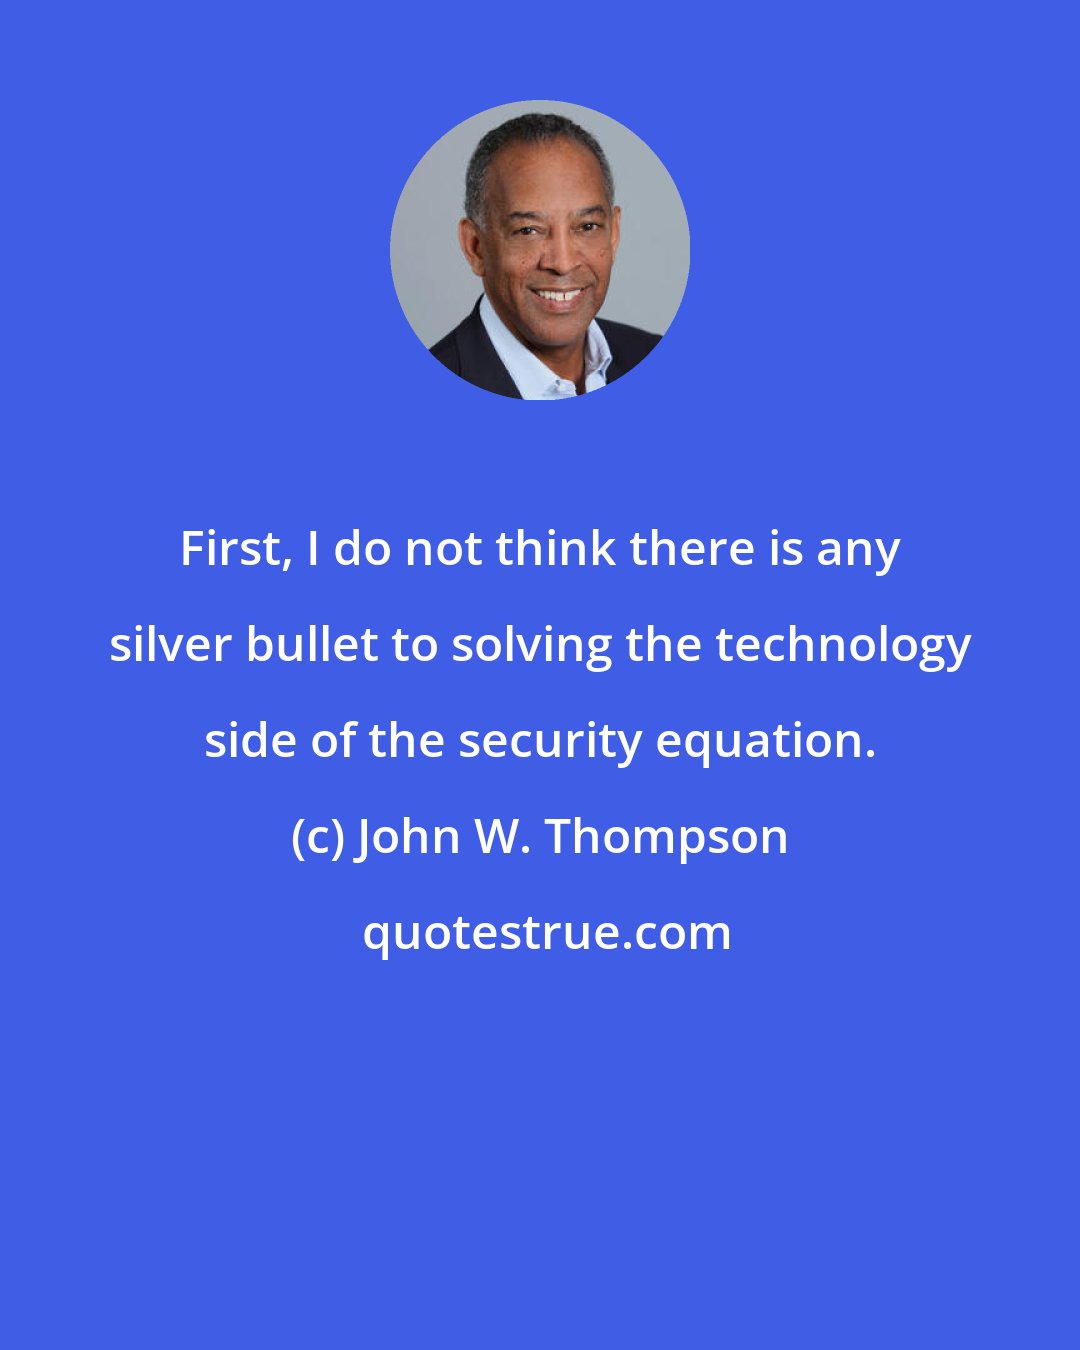 John W. Thompson: First, I do not think there is any silver bullet to solving the technology side of the security equation.